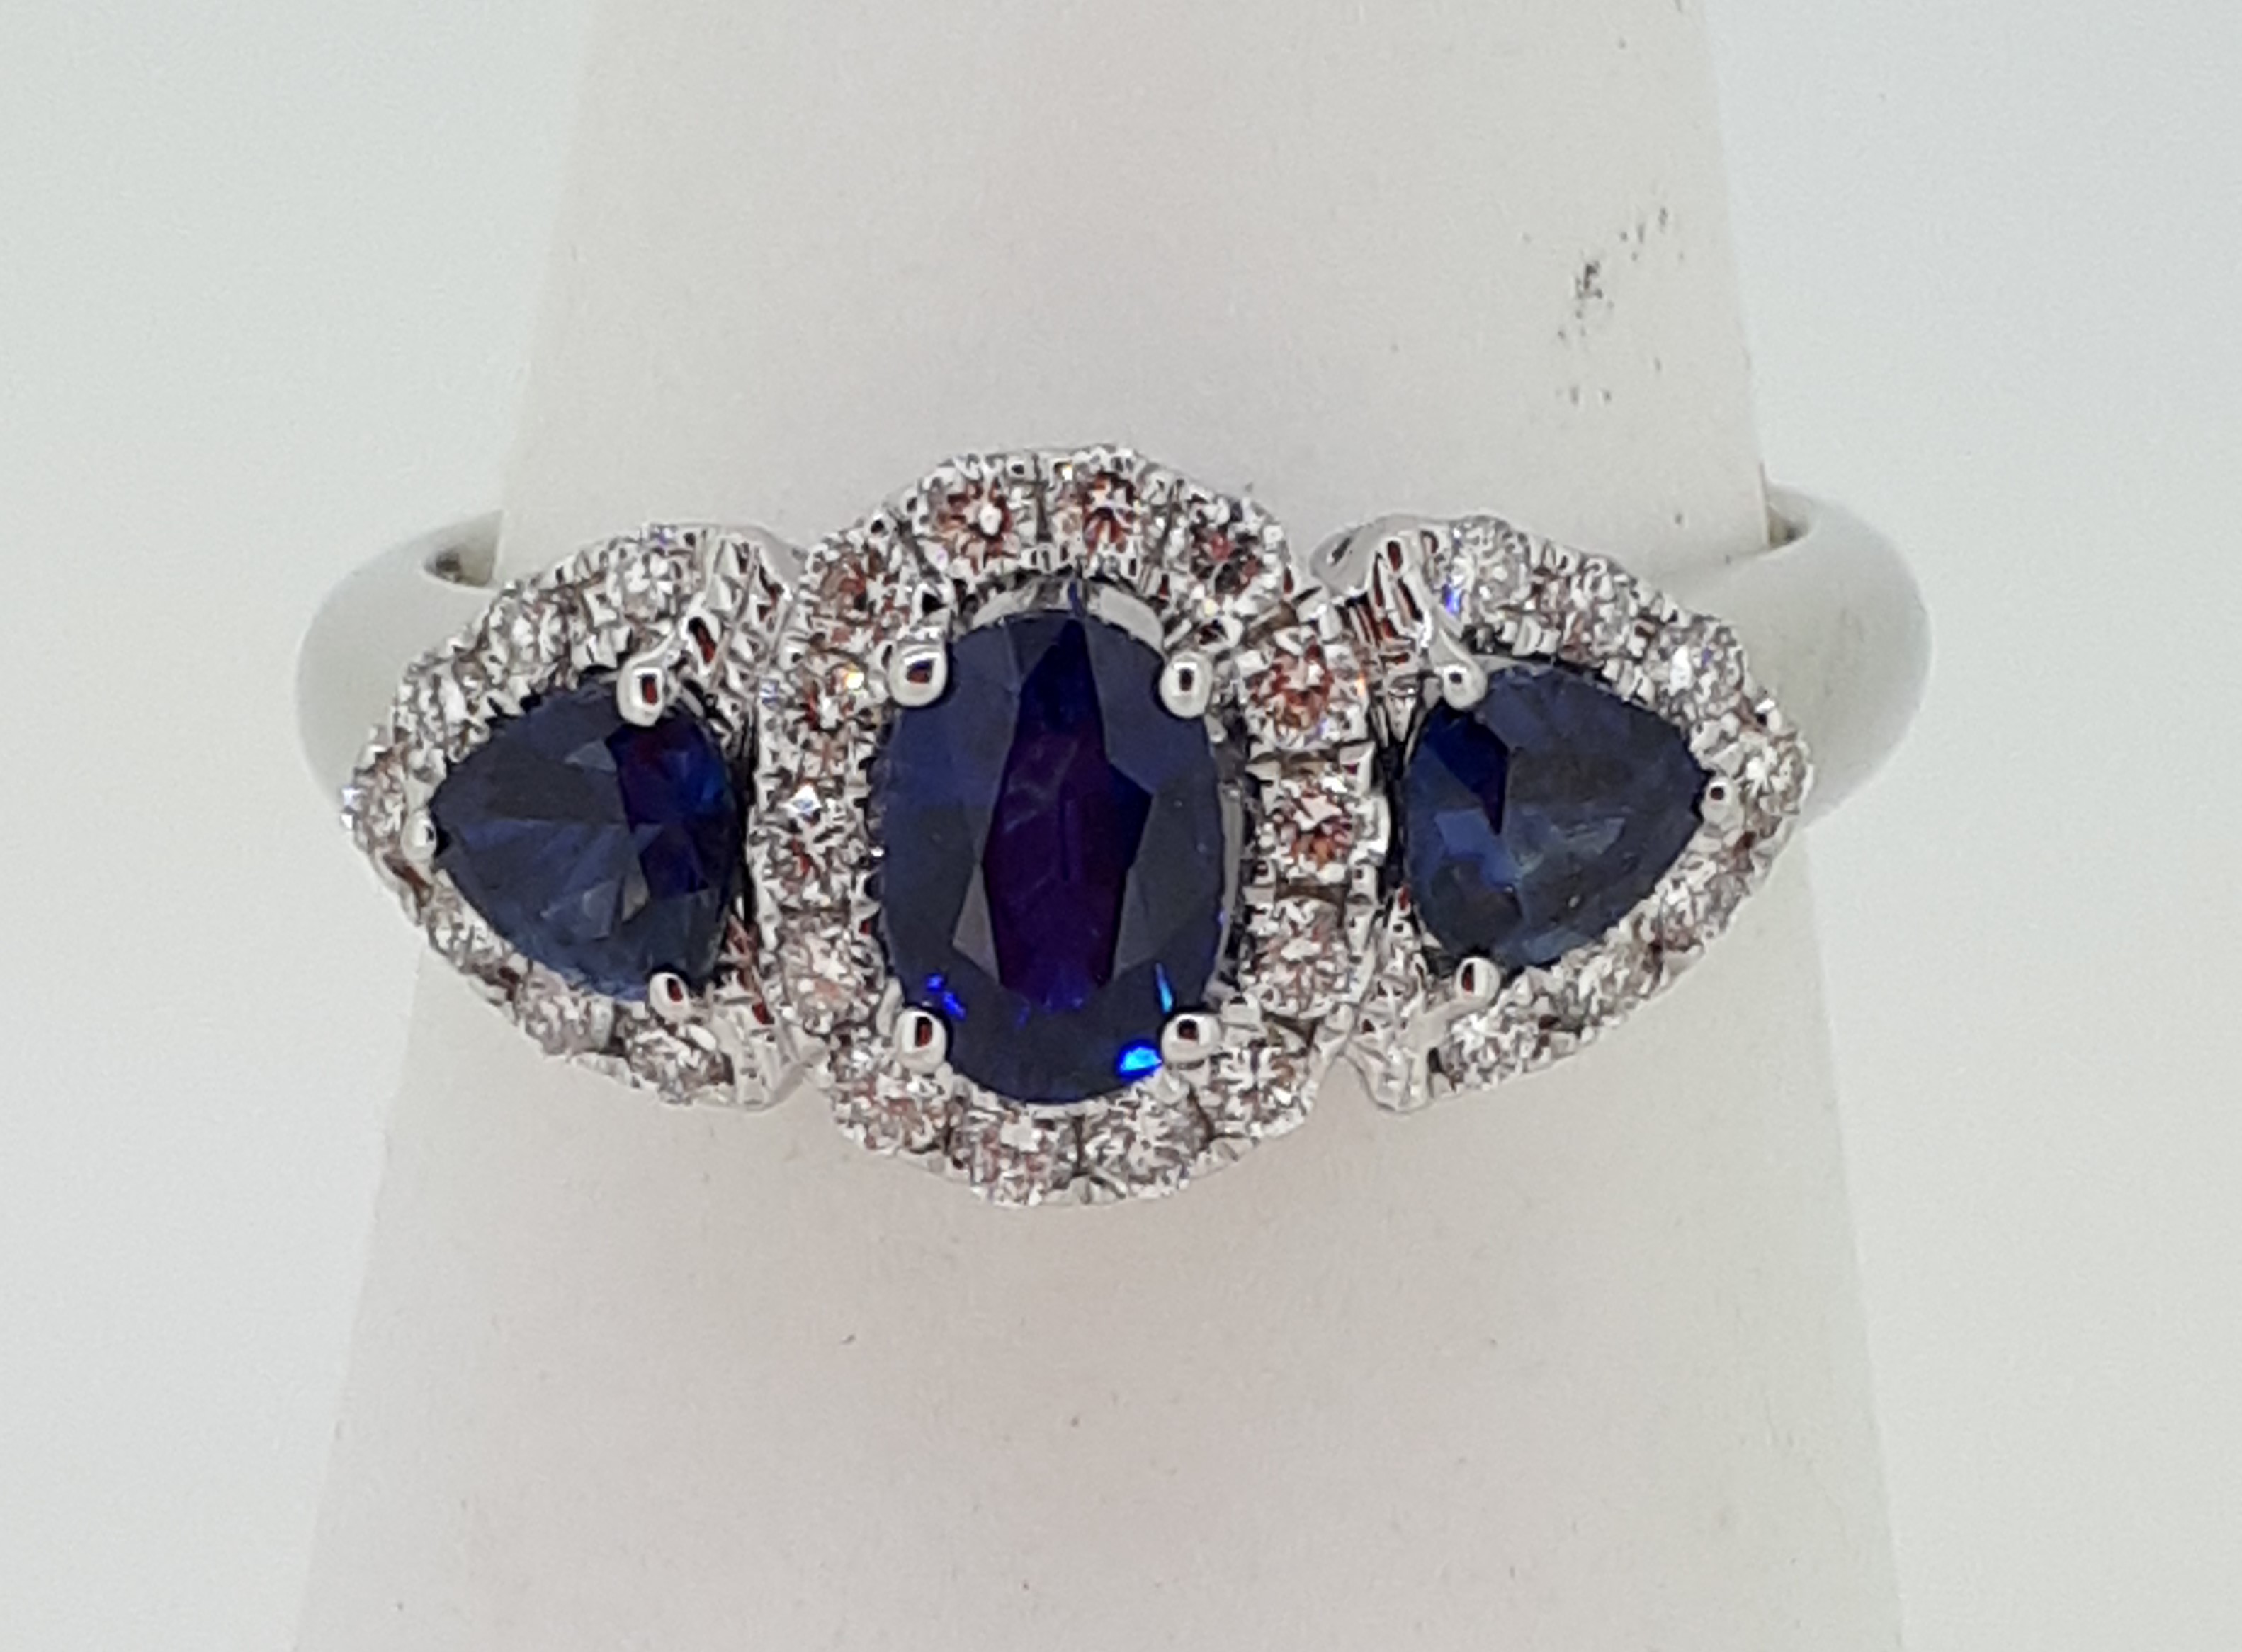 18ct (750) White Gold 1.26ct Oval Sapphire & 0.38ct Diamond Cluster Ring - Image 5 of 6